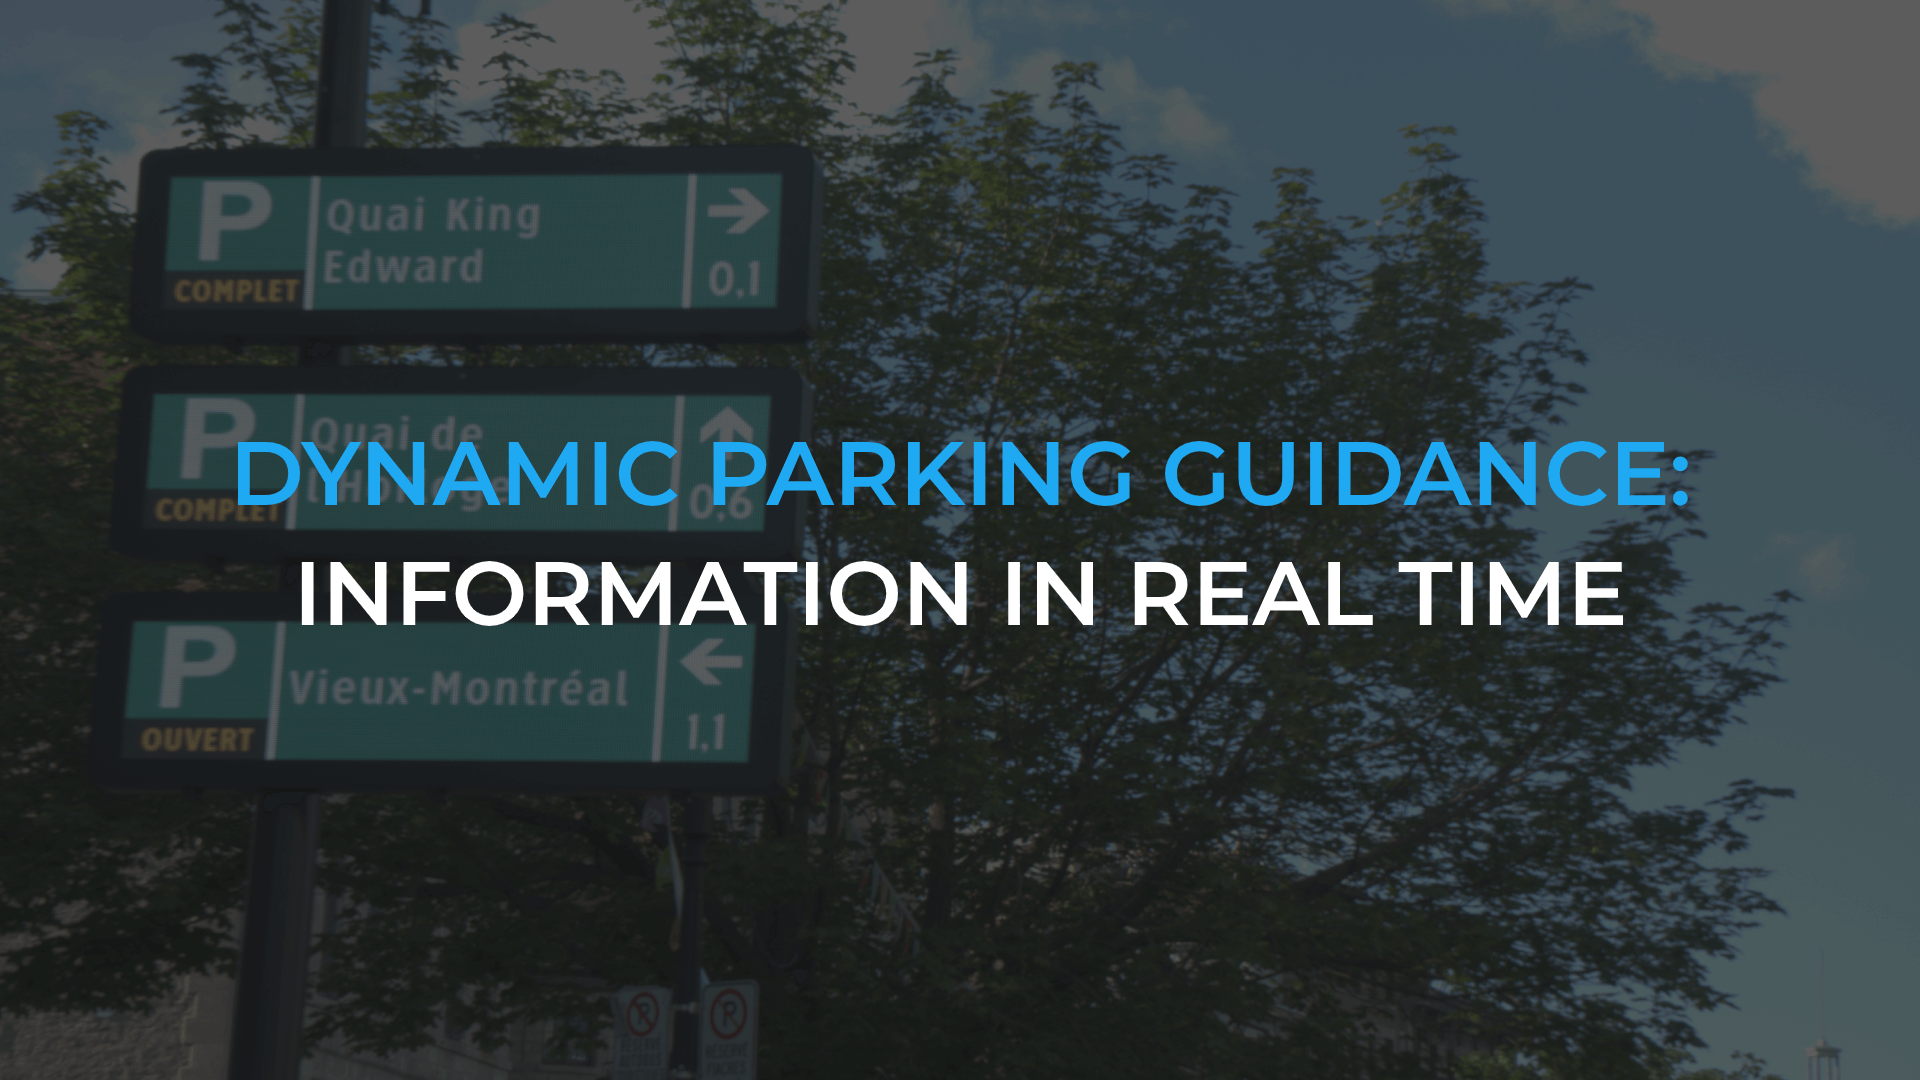 Dynamic parking guidance: Information in real time